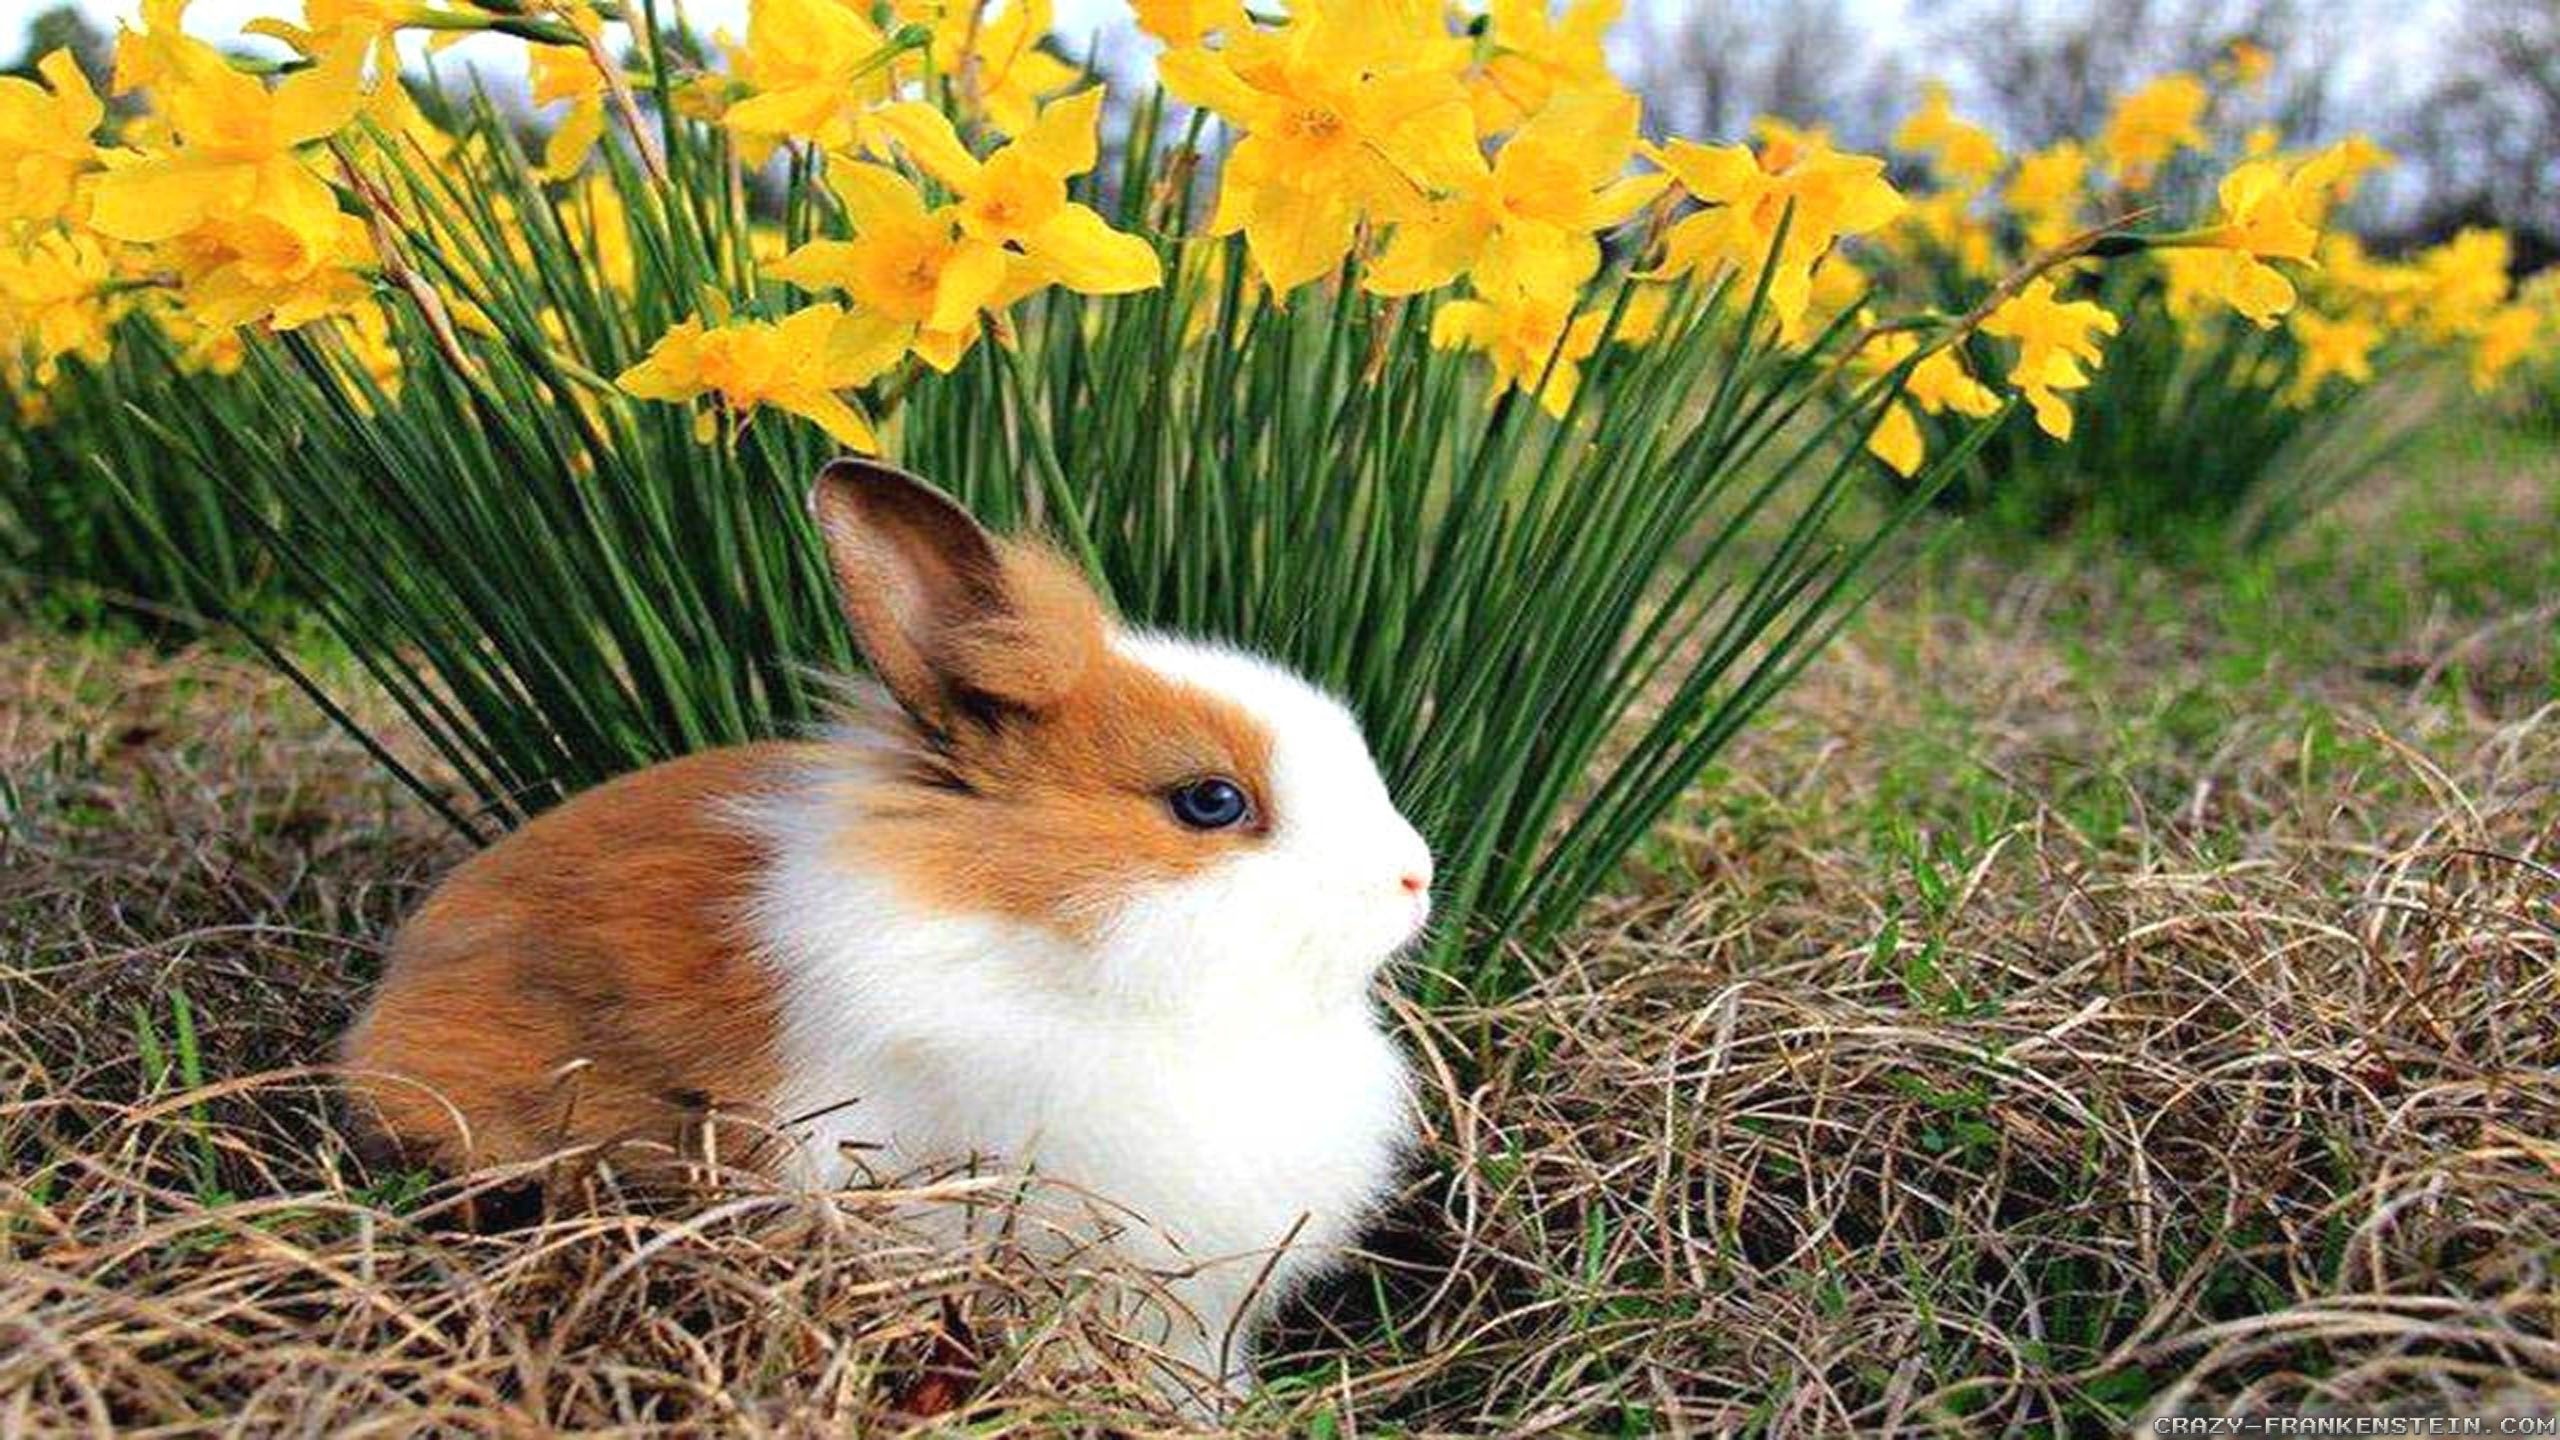 2560x1440 Spring Animals Wallpapers Cool Visiteurope uat Image source from this